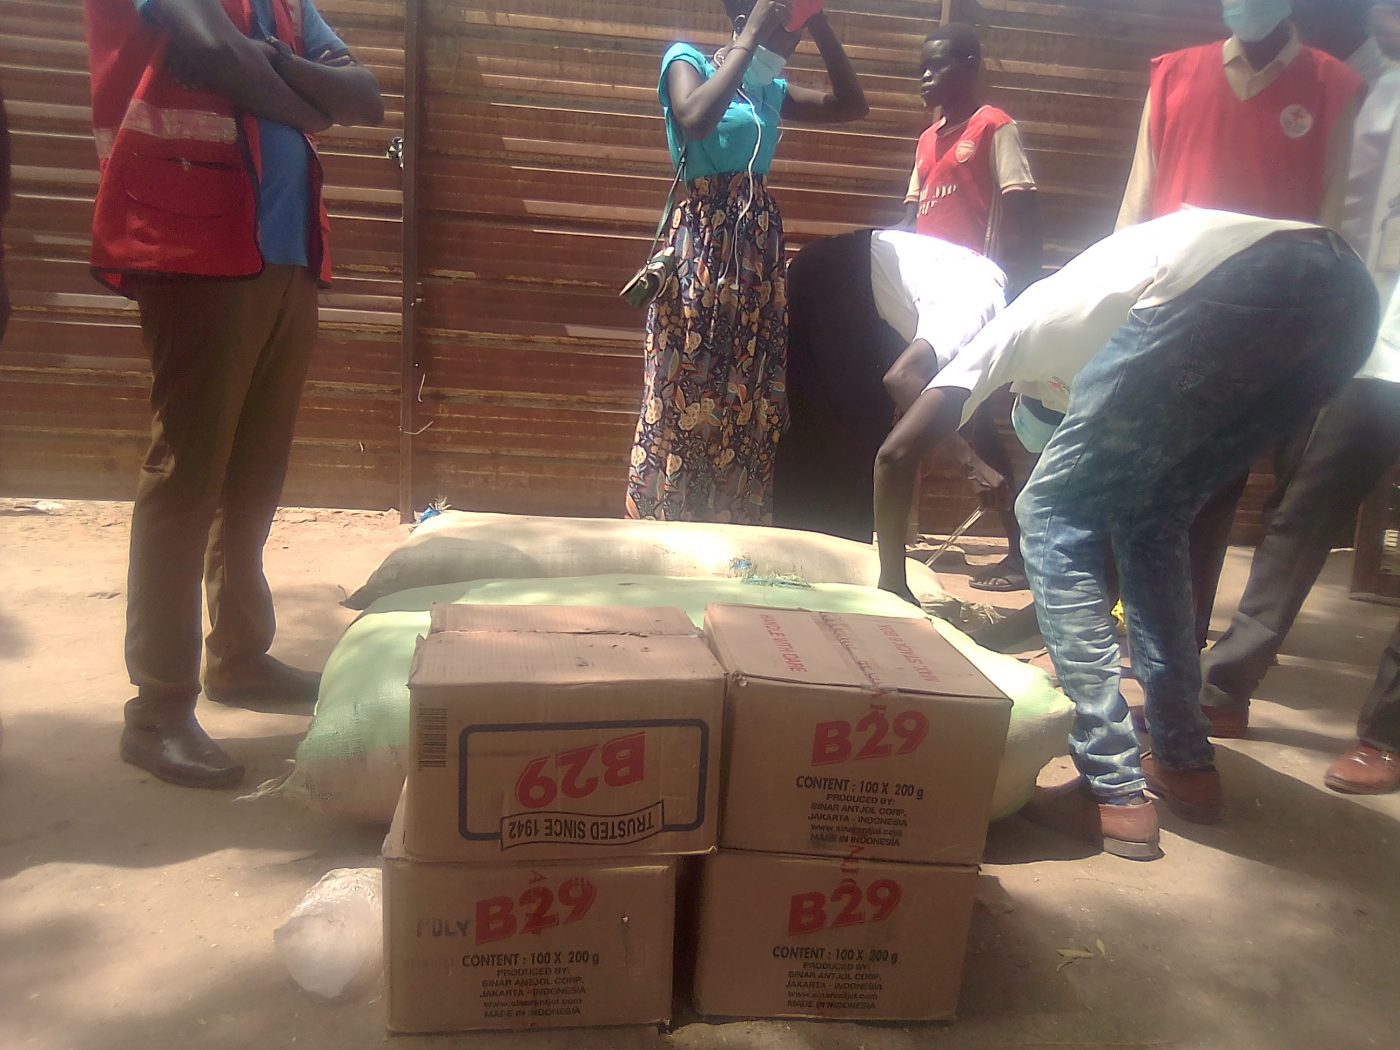 Red cross donates mosquito nets, washing soap to inmates